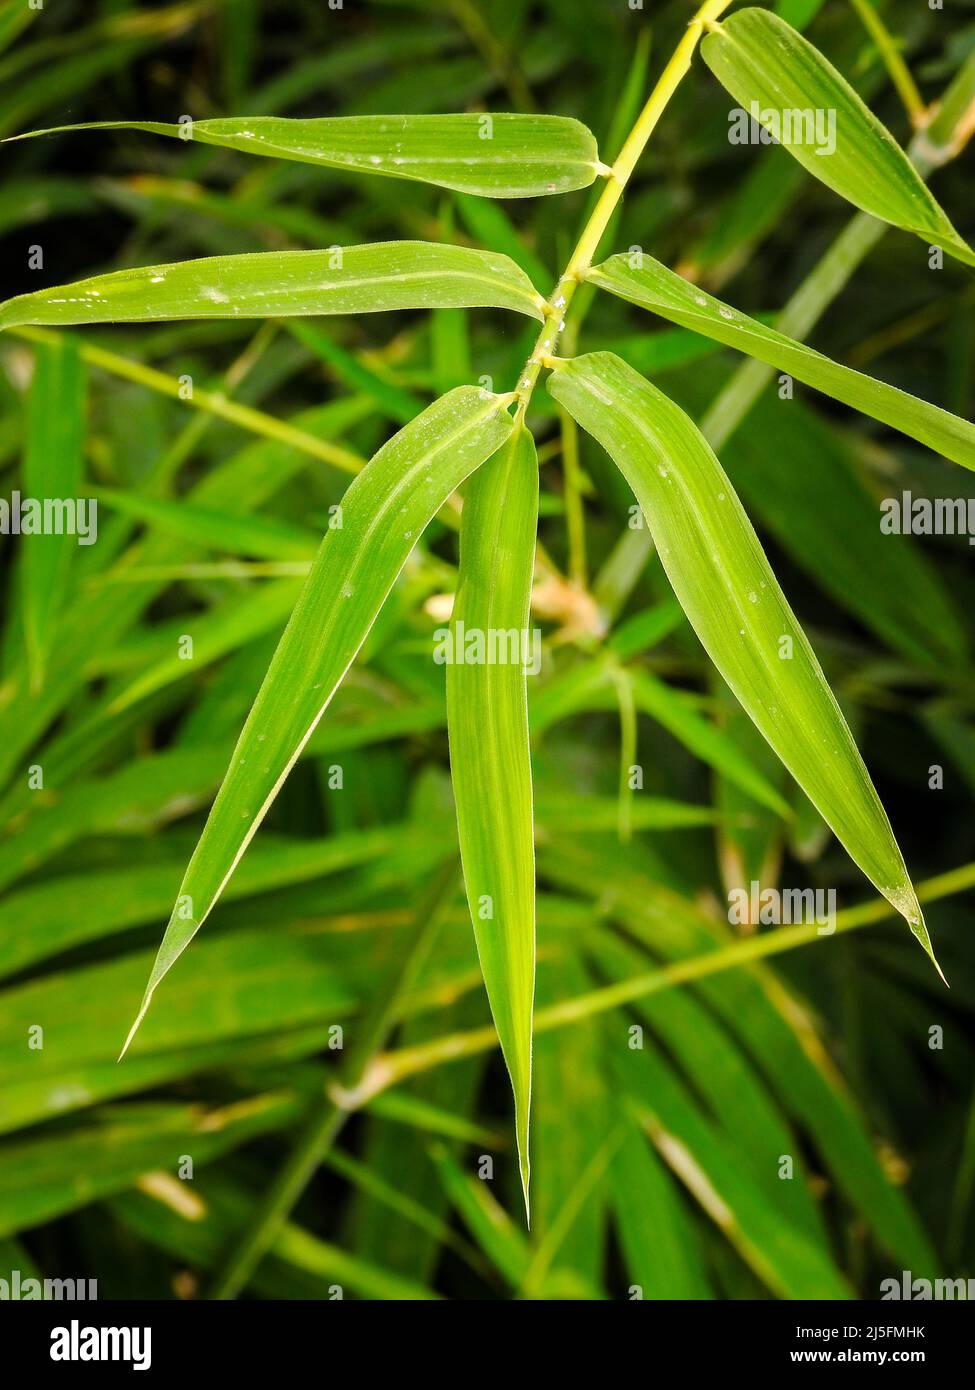 Bamboo Leaves. Bambusa tulda, or Indian timber bamboo, is considered to be one of the most useful of bamboo species. It is native to the Indian subcon Stock Photo